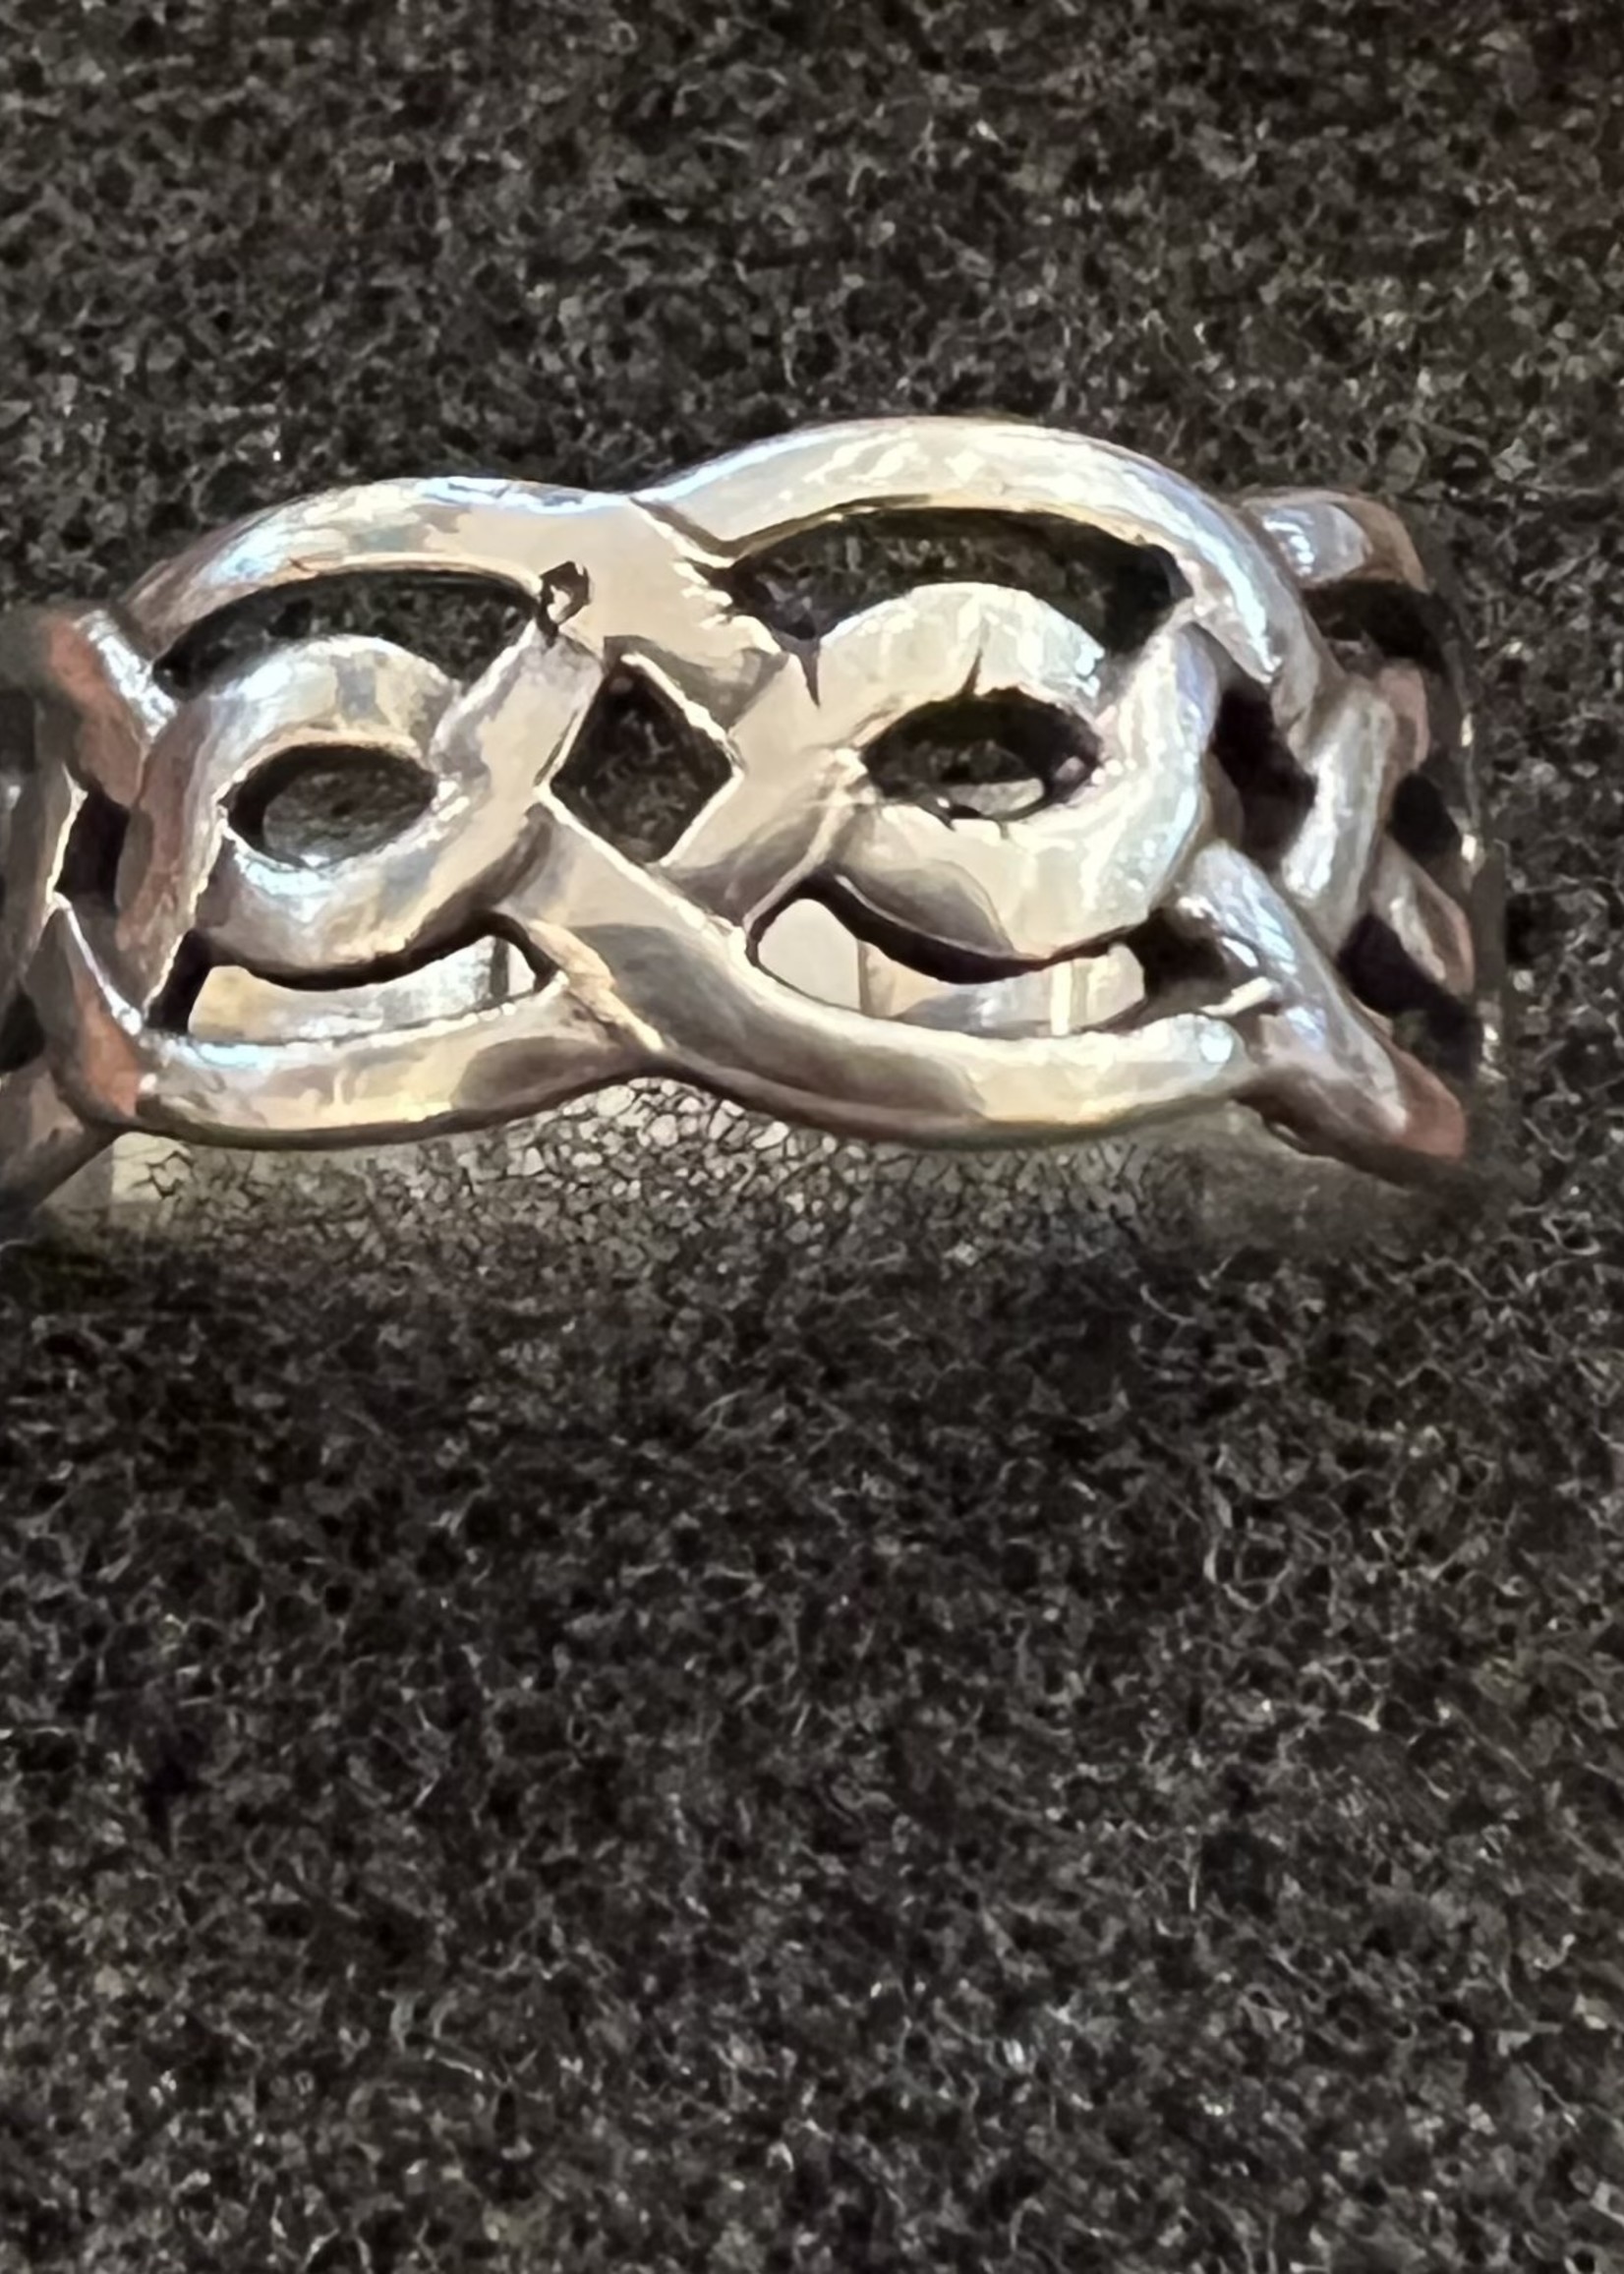 Sterling Silver Celtic Band